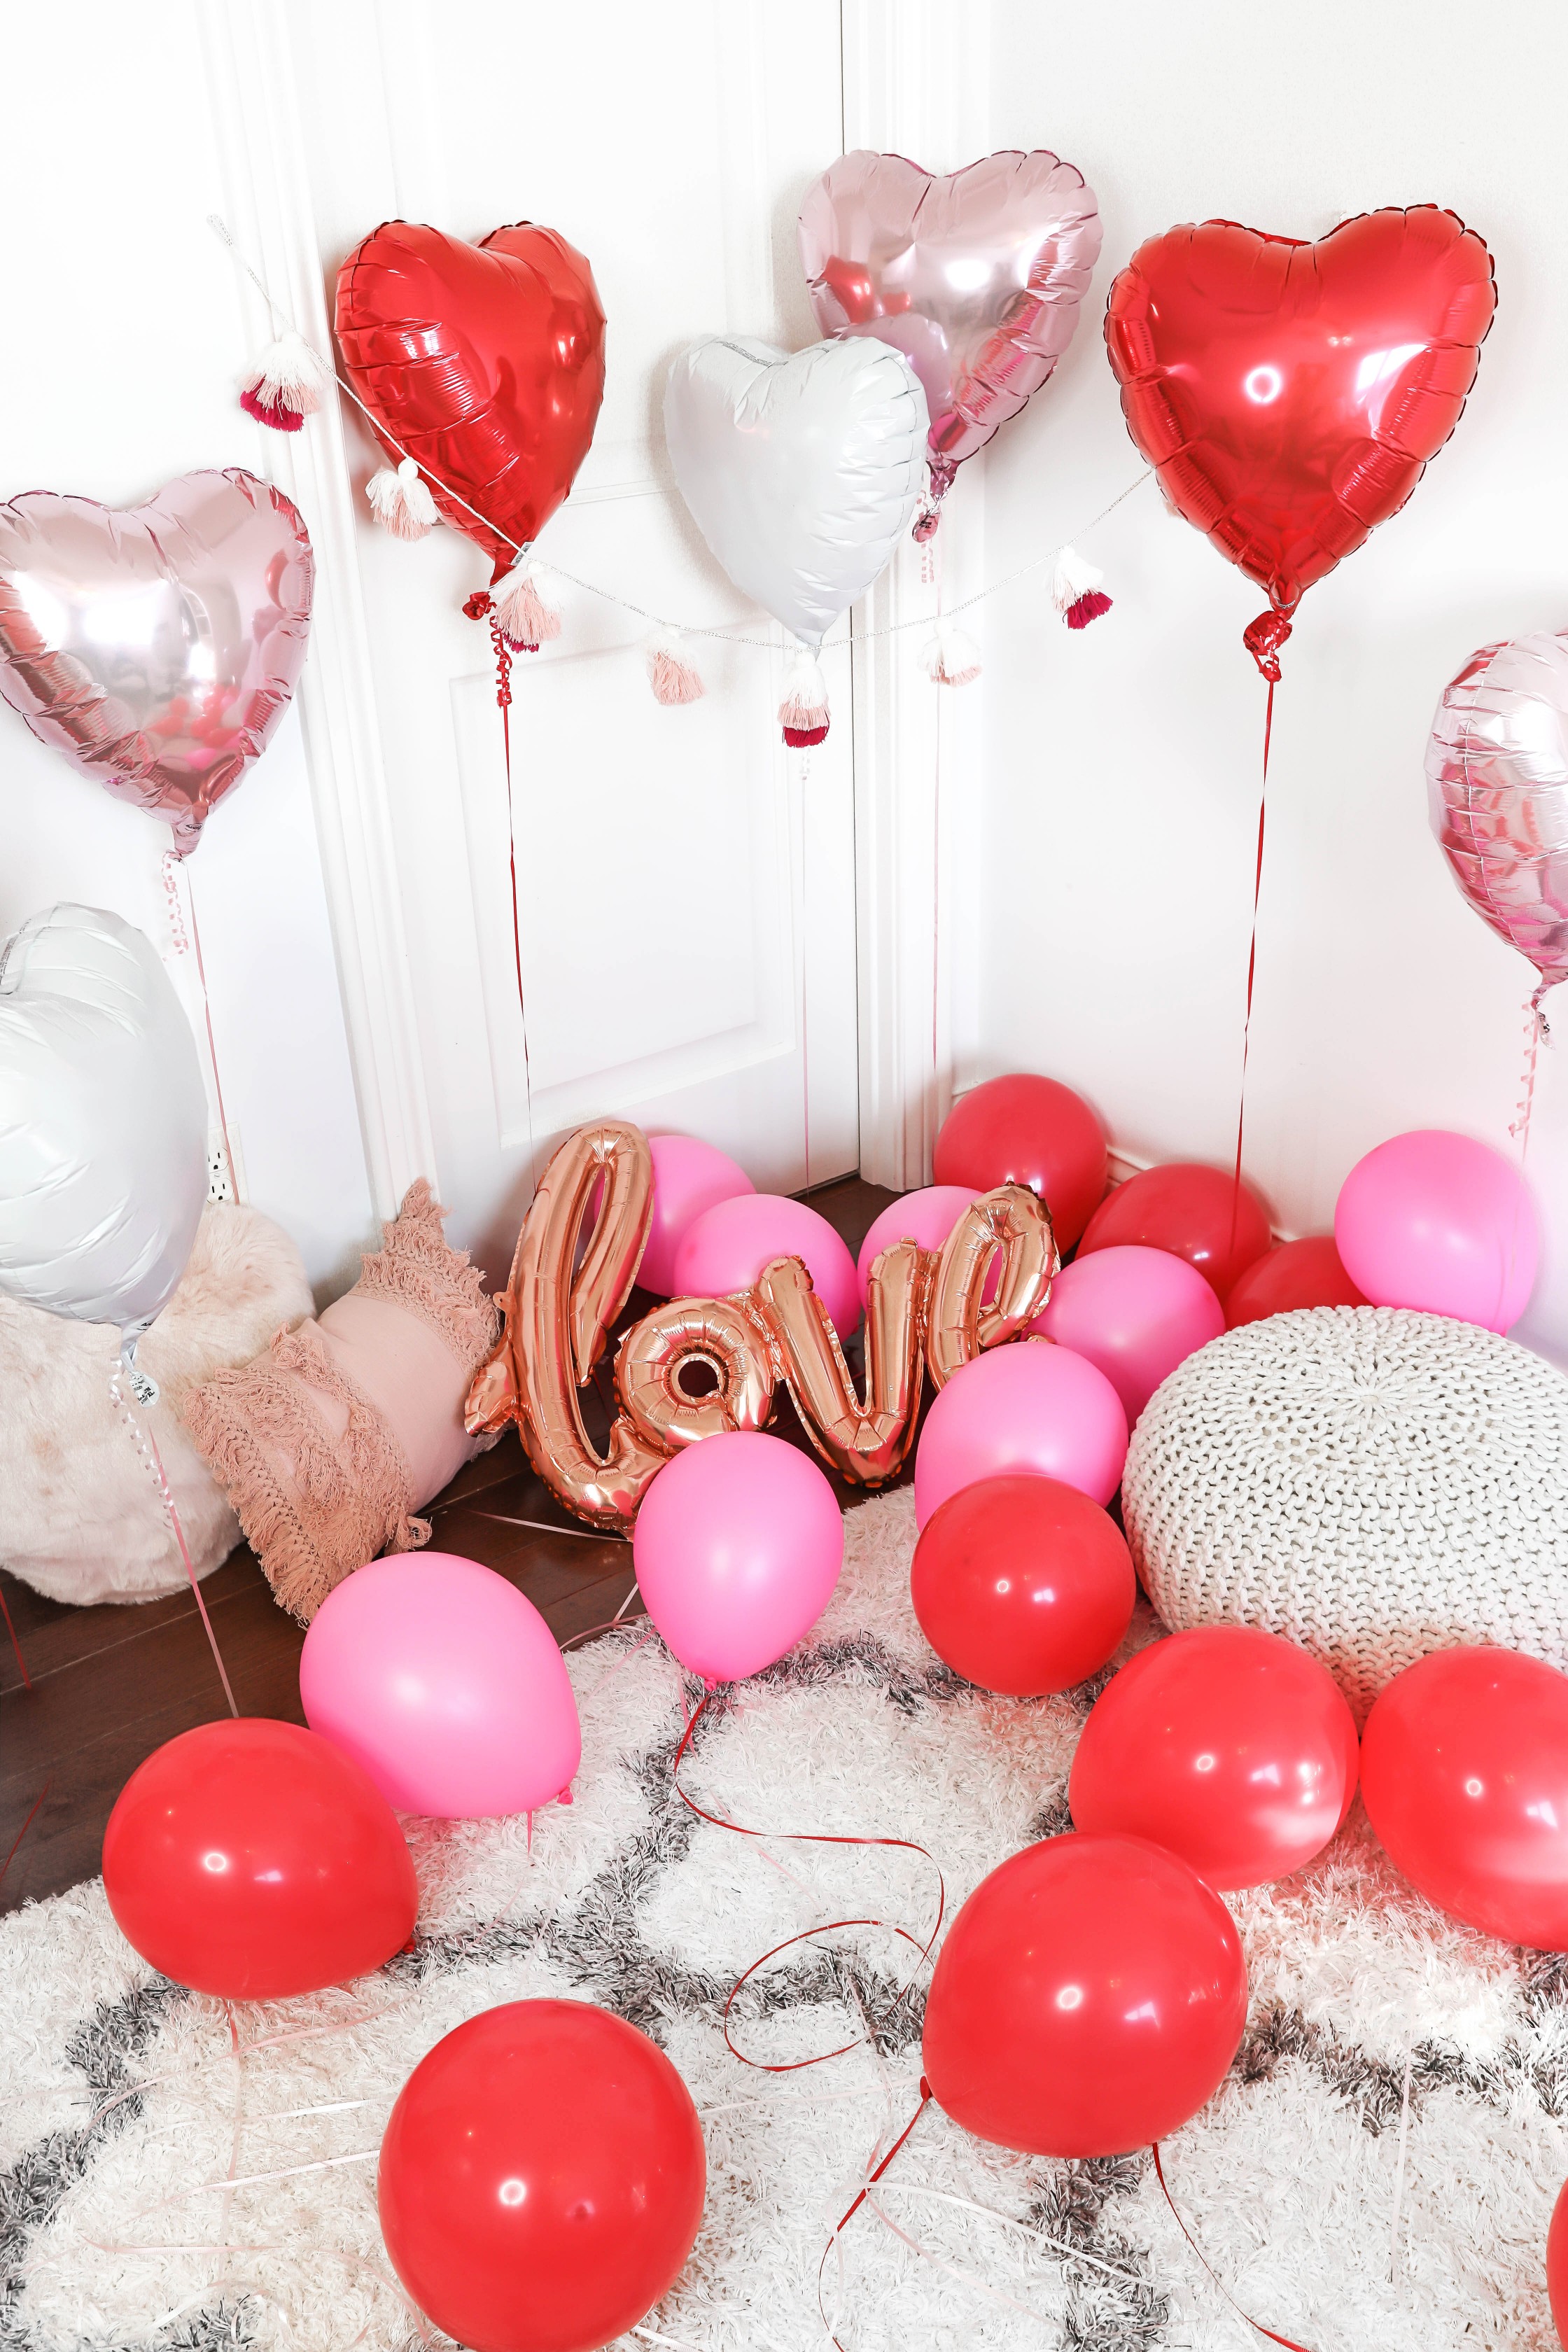 Valentine's Day shoot with the cutest heart shaped balloons and pink and red decor! My cute little pomeranian puppy dog made an appearance in the pics! I am wearing the cutest, tan, off the shoulder sweater from amazon and the cutest ripped denim from Red Dress Boutique! Details on style and fashion blog daily dose of charm by lauren lindmark